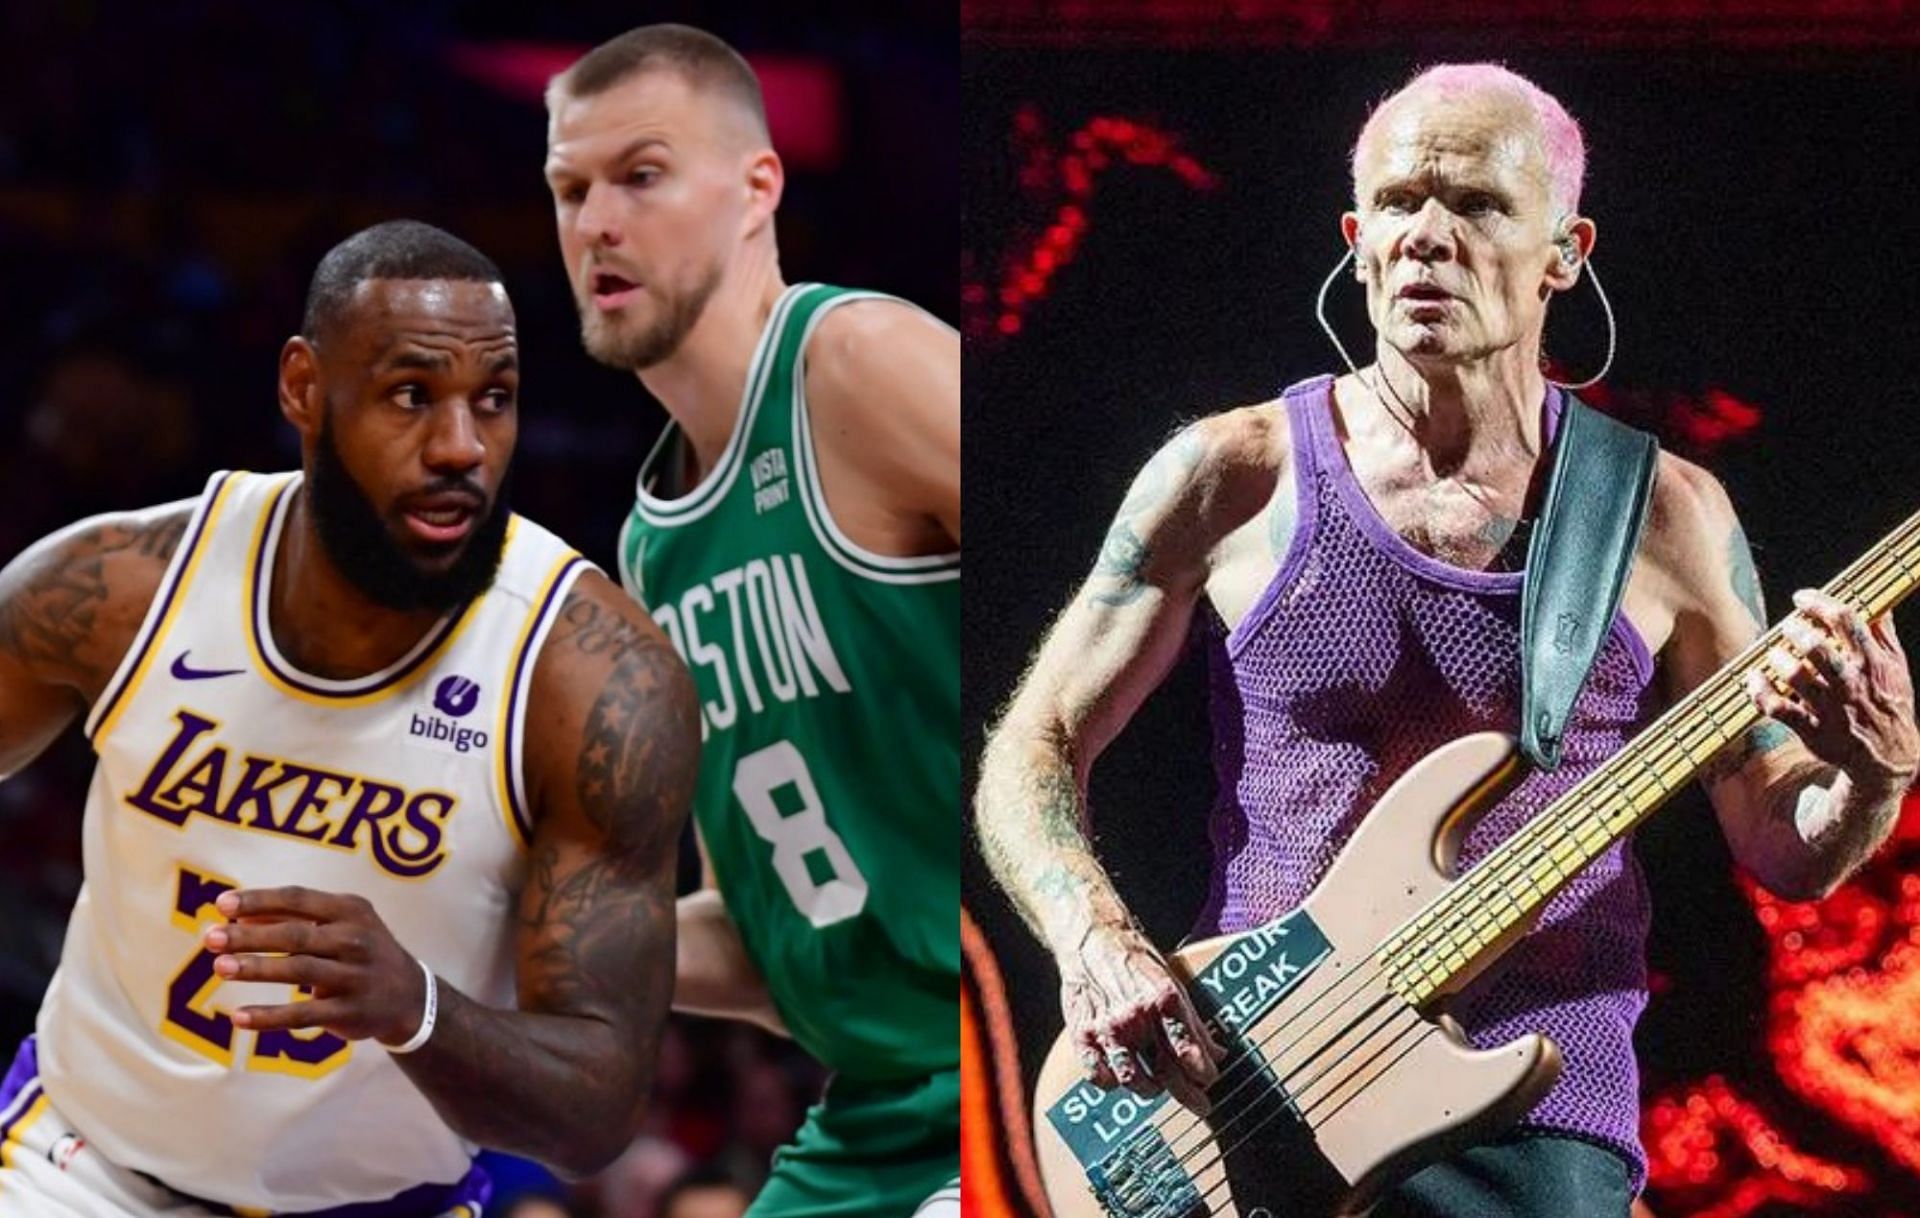 Red Hot Chili Peppers bassist Flea conceded to the fact that the Boston Celtics overwhelmed the LA Lakers in their Christmas Day game.